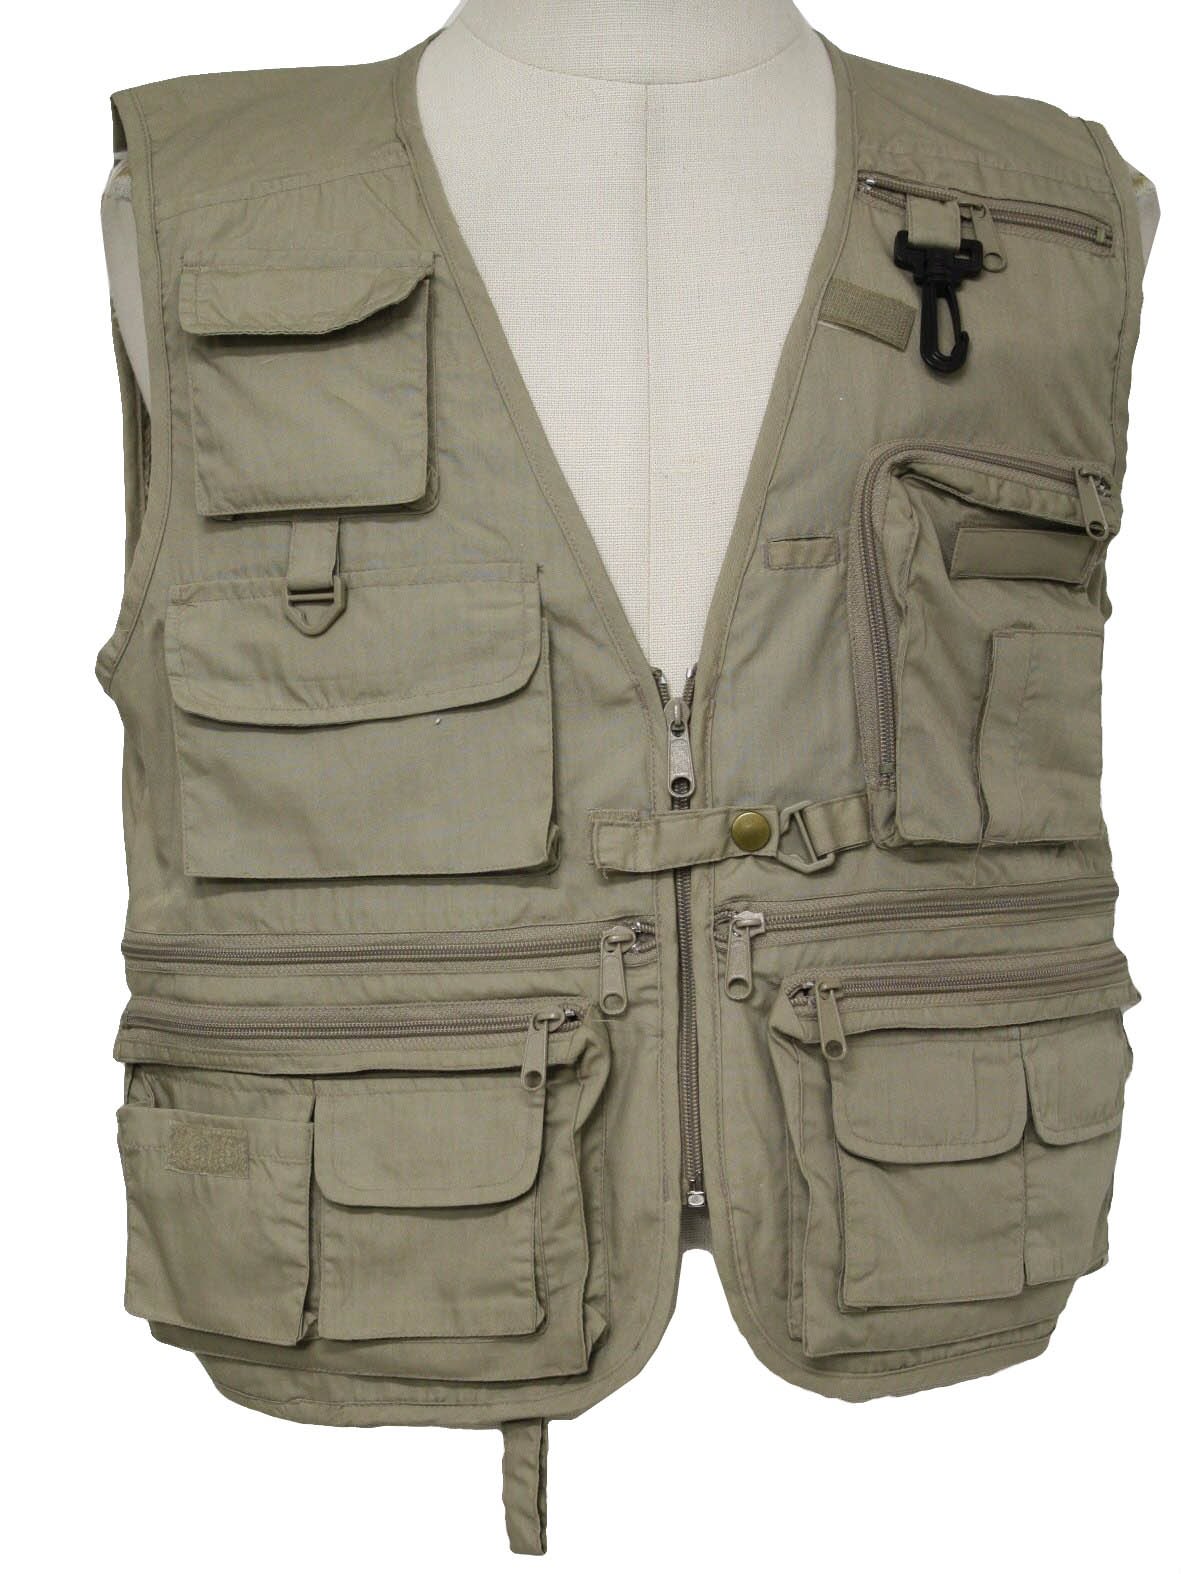 1990's Vest (Field and Stream): 90s -Field and Stream- Mens tan cotton  polyester poplin fishing vest with front zipper, many ultility pockets with  flaps, velcro closures, or zippers, and large back zippered